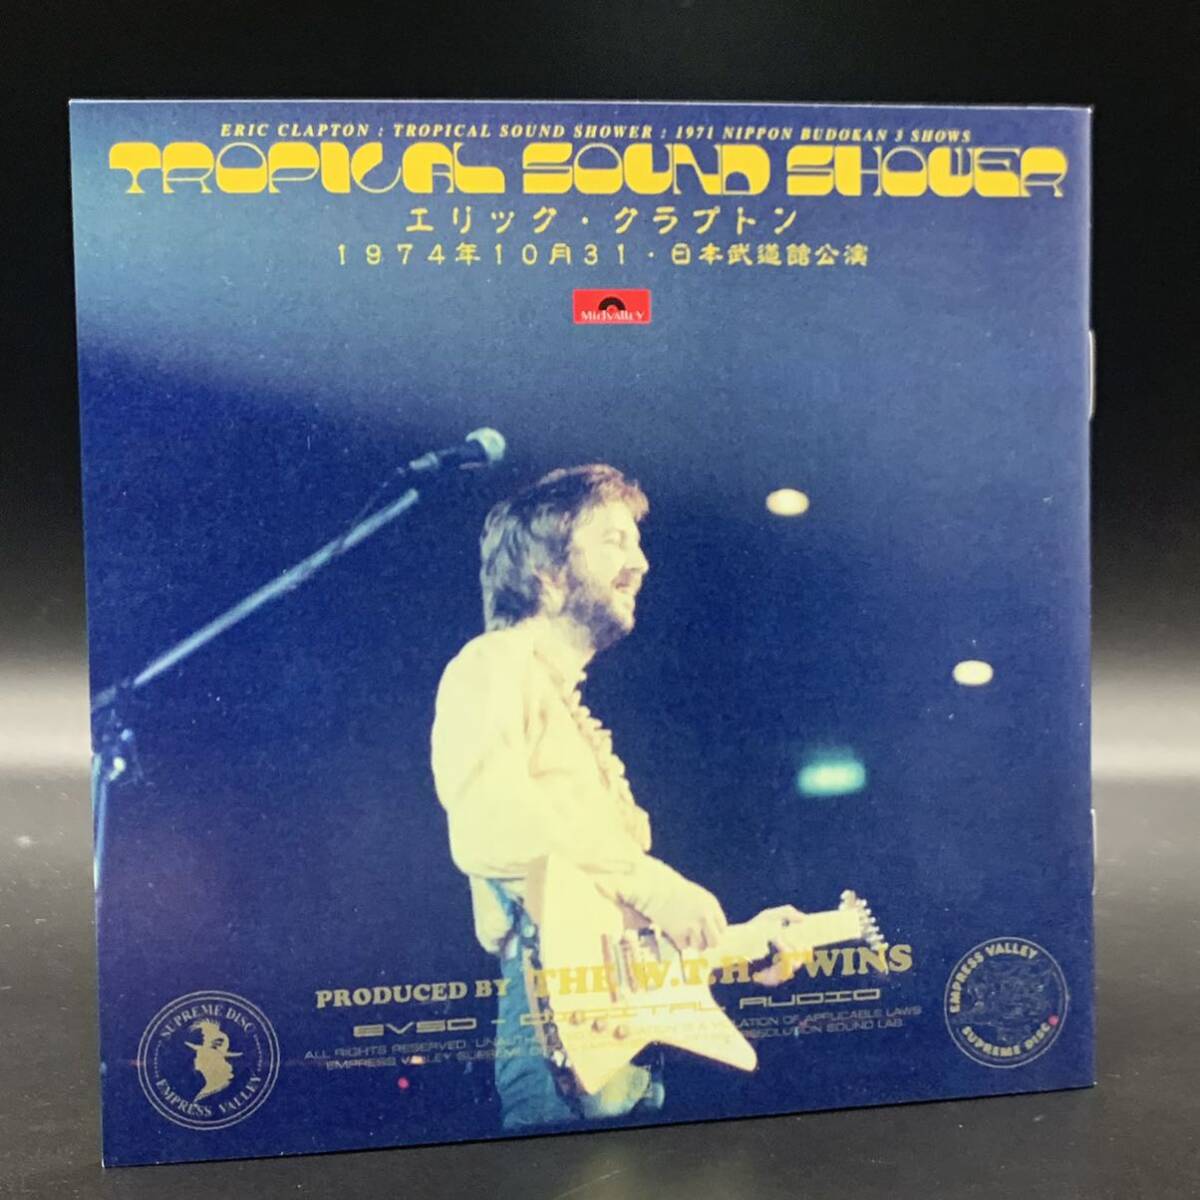 ERIC CLAPTON / TROPICAL SOUND SHOWER「亜熱帯武道館」(6CD BOX with Booklet) 初来日武道館3公演を全て初登場音源で収録！完売品！の画像10